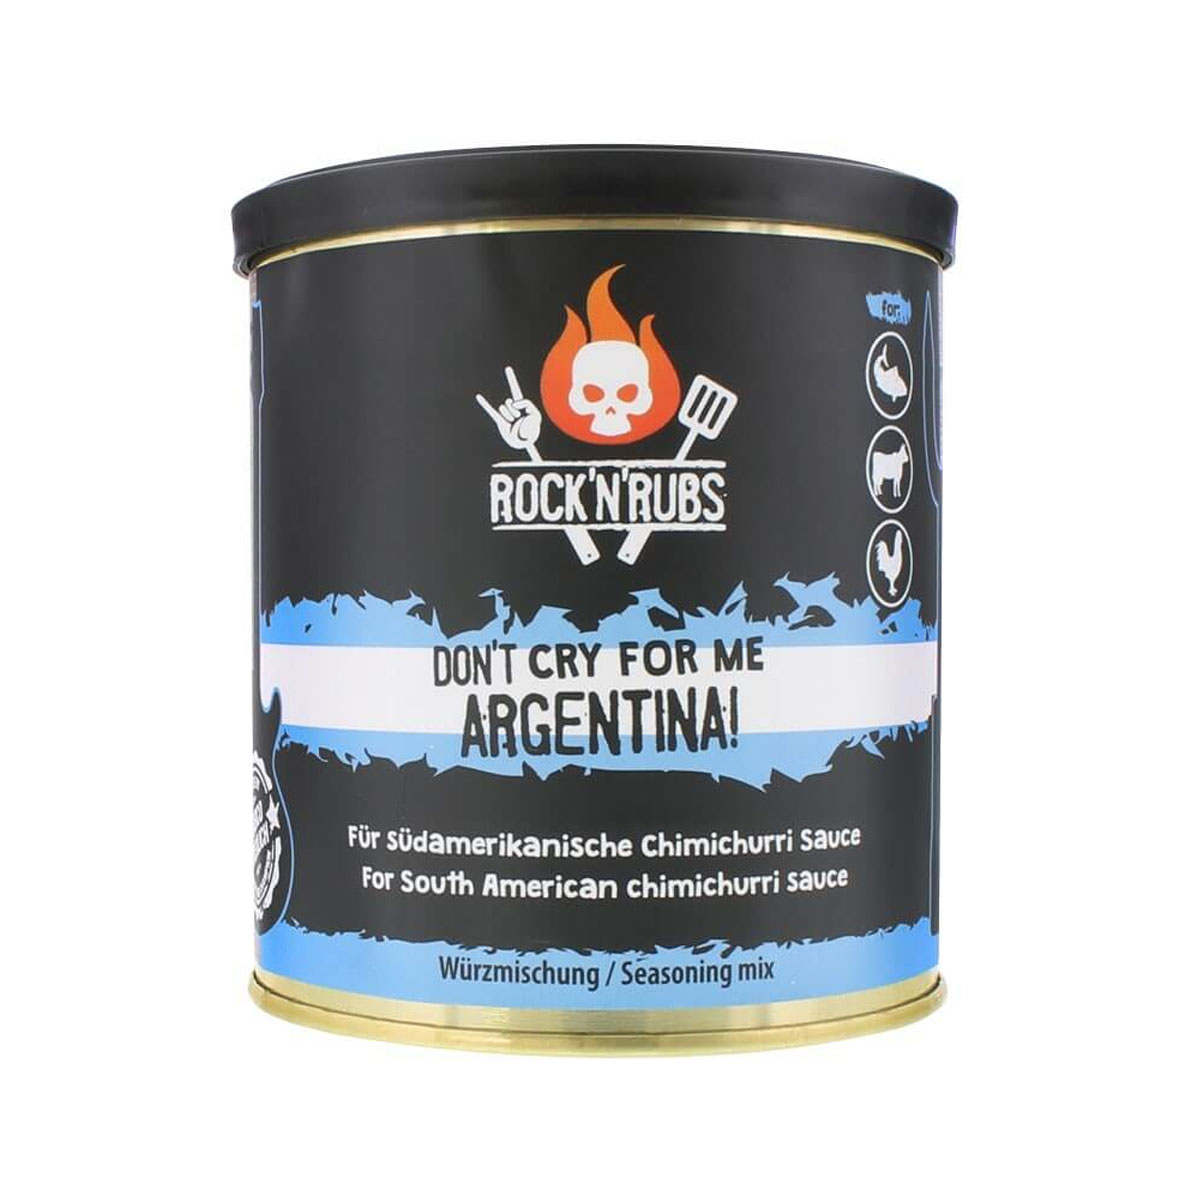 Rock'n'Rubs "Don't cry for me Argentina" Frontline Rub, 100g